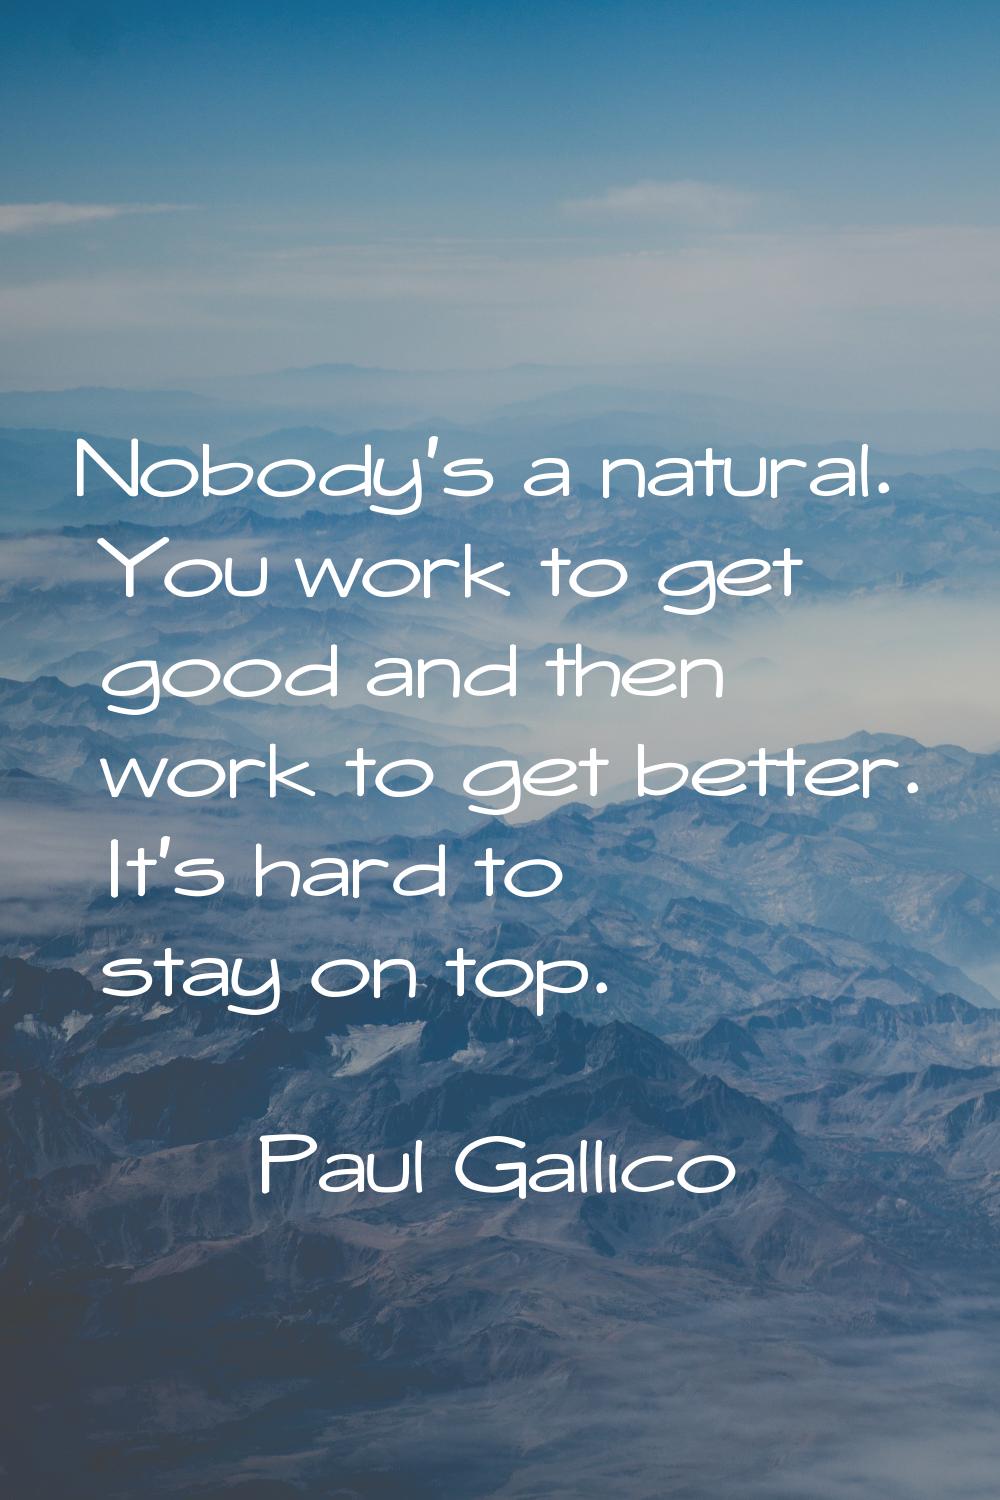 Nobody's a natural. You work to get good and then work to get better. It's hard to stay on top.